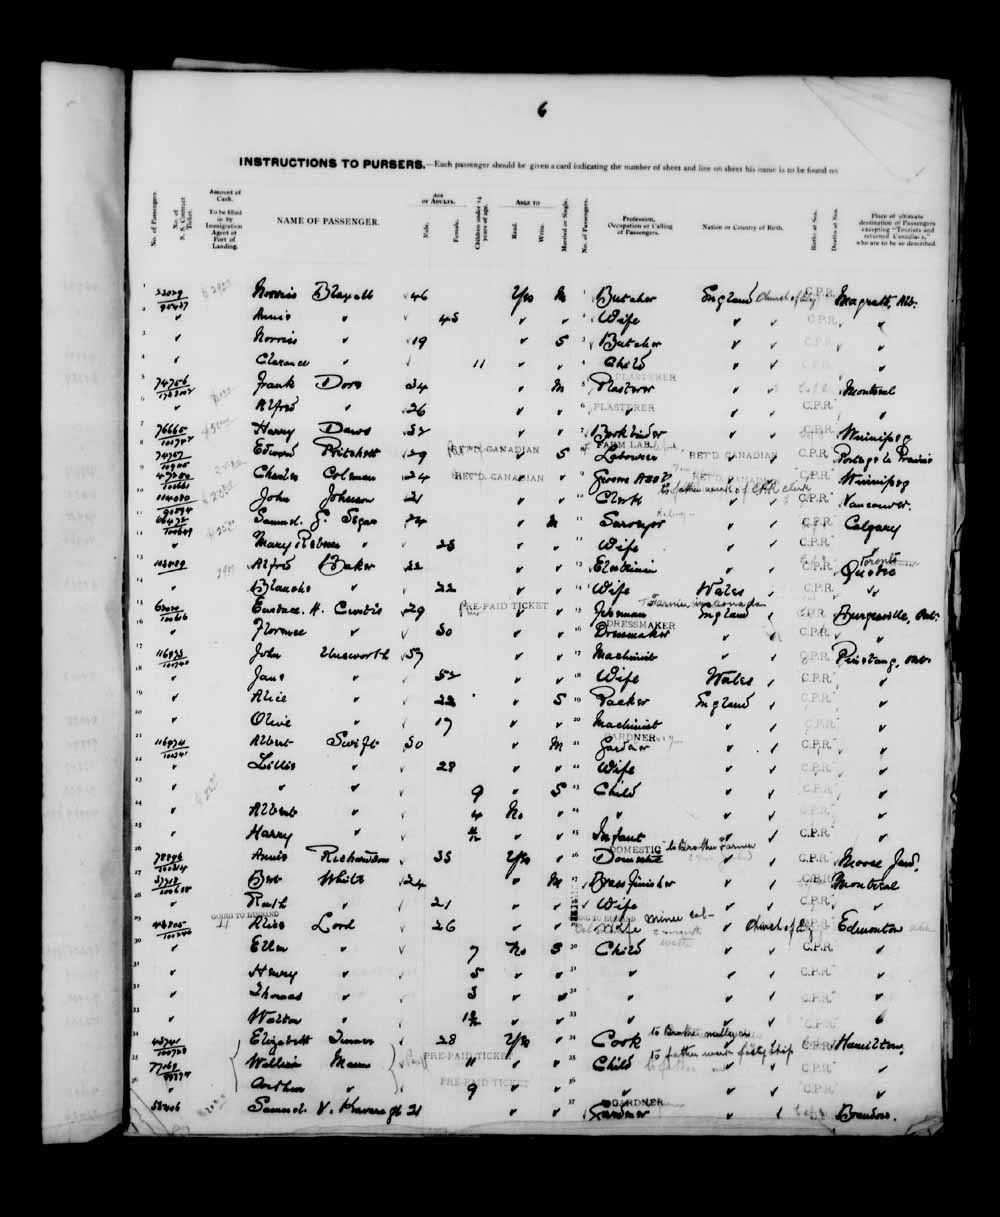 Digitized page of Quebec Passenger Lists for Image No.: e003591256